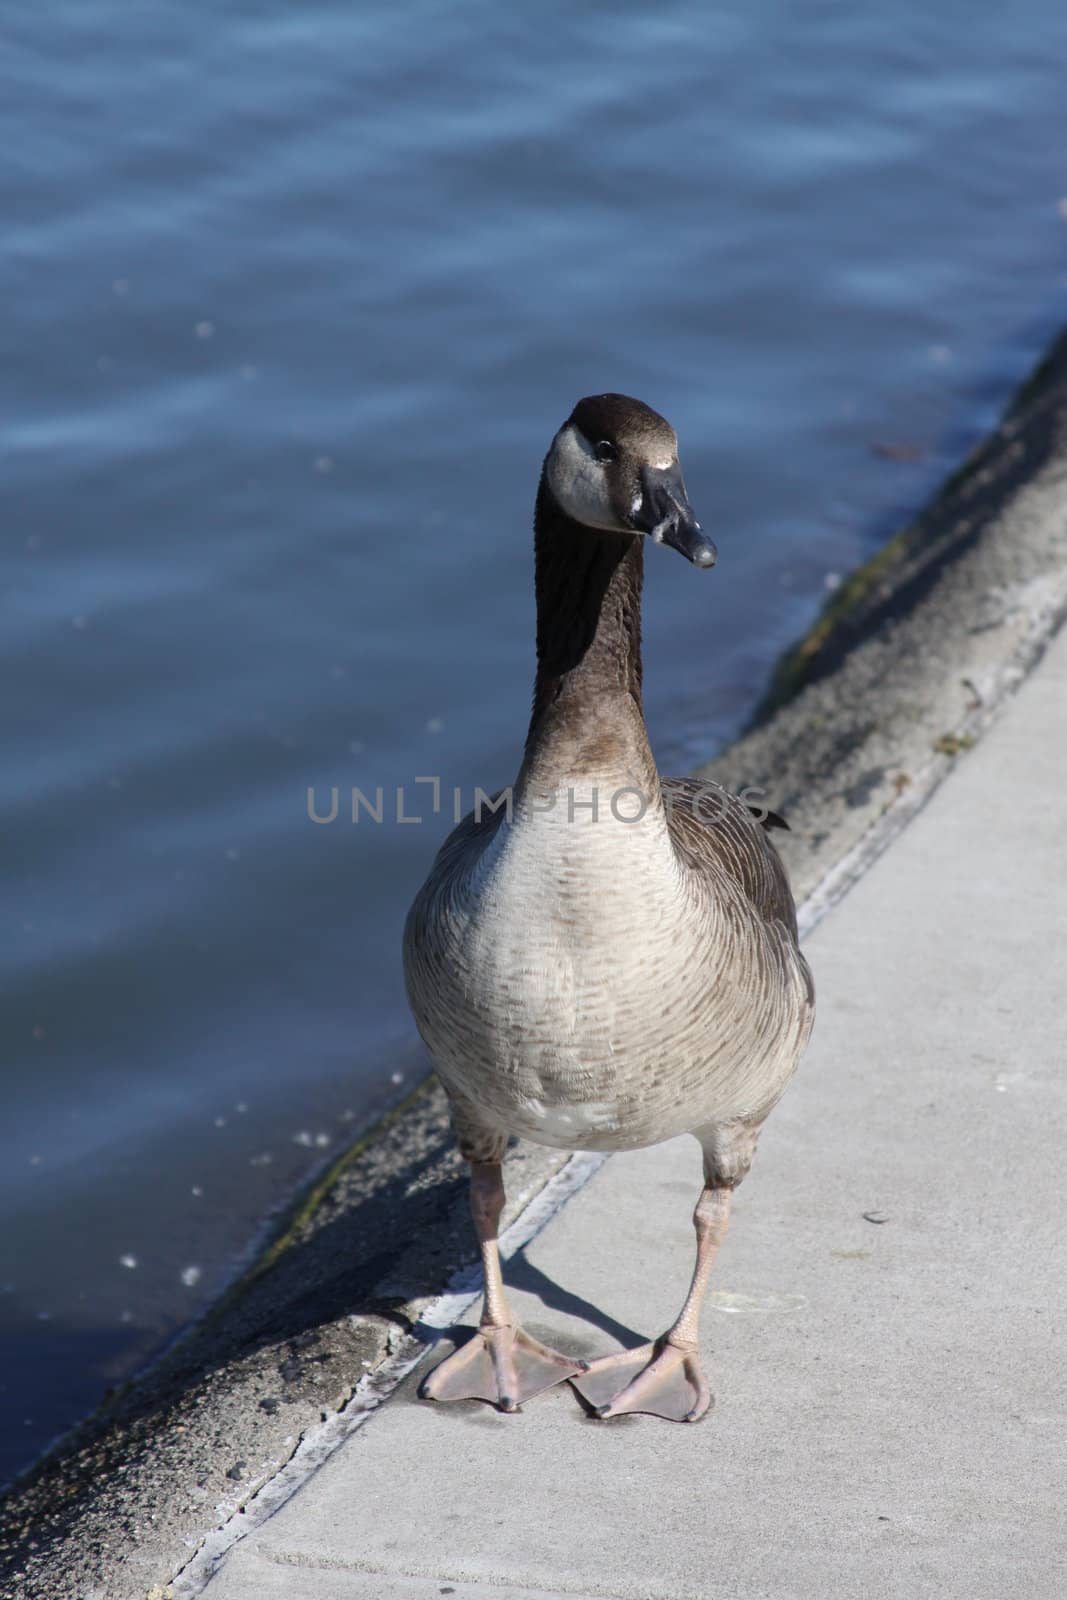 Canadian Goose Close Up by MichaelFelix